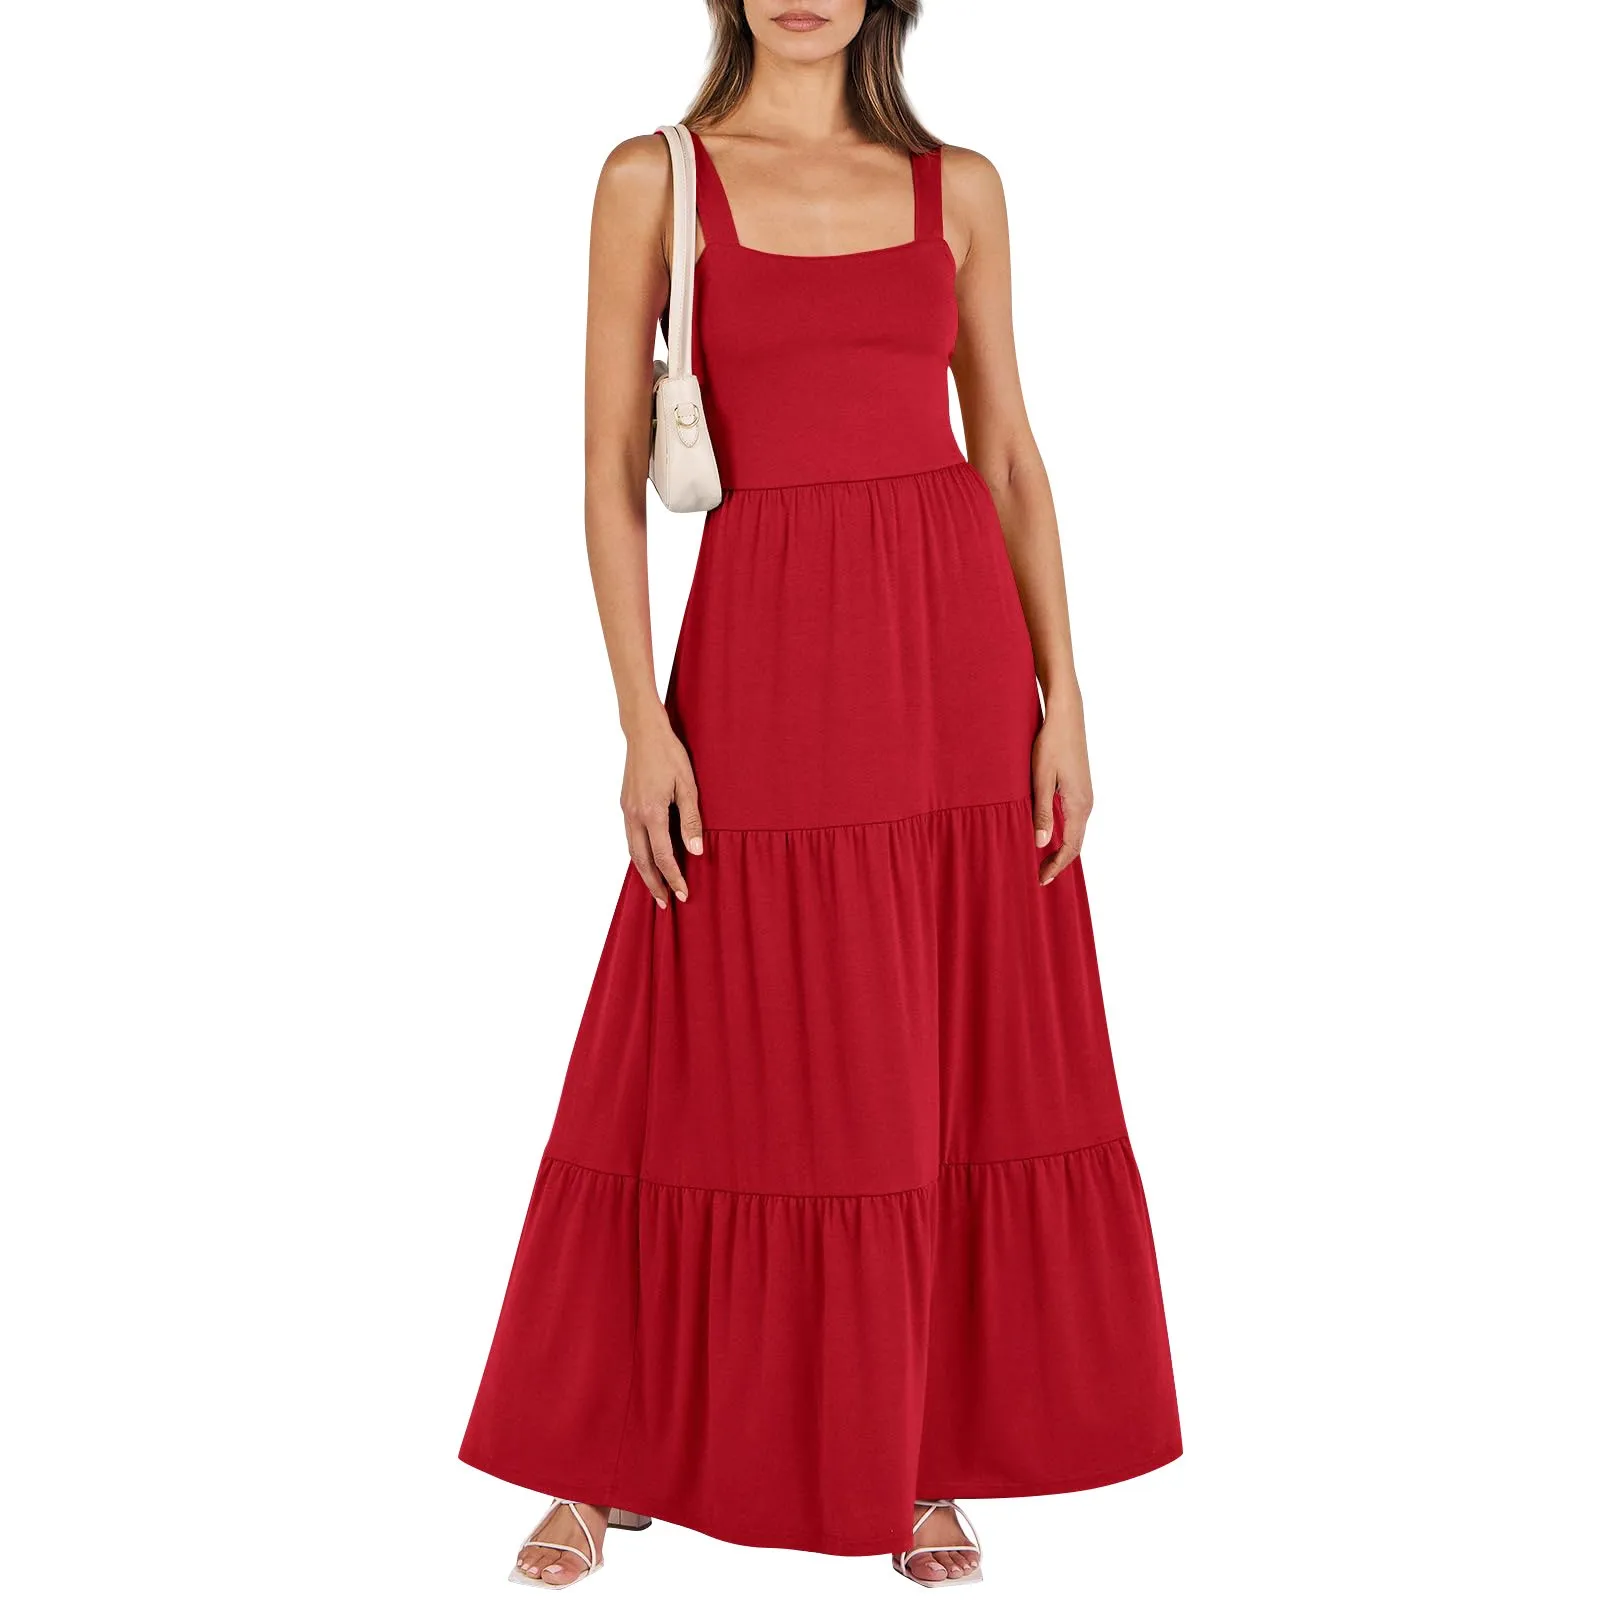 

Women's Summer Casual Long Maxi Beach Vacation Dresses Sleeveless Square Neck Flowy Tiered Sun Dress With Pockets فساتين طويلة #